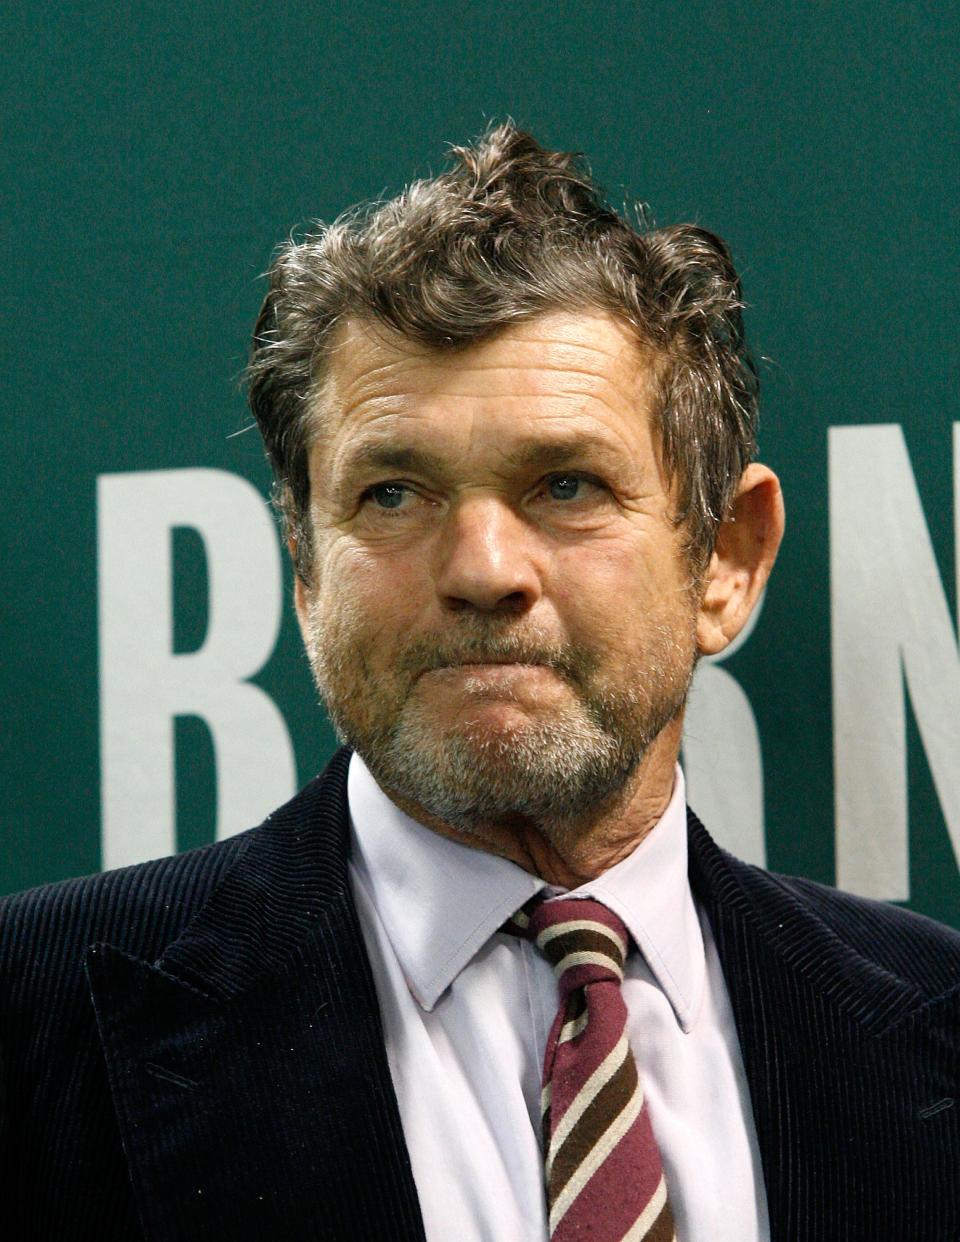 Jann Wenner has been removed from the Rock & Roll Hall of Fame board of directors after controversial comments.